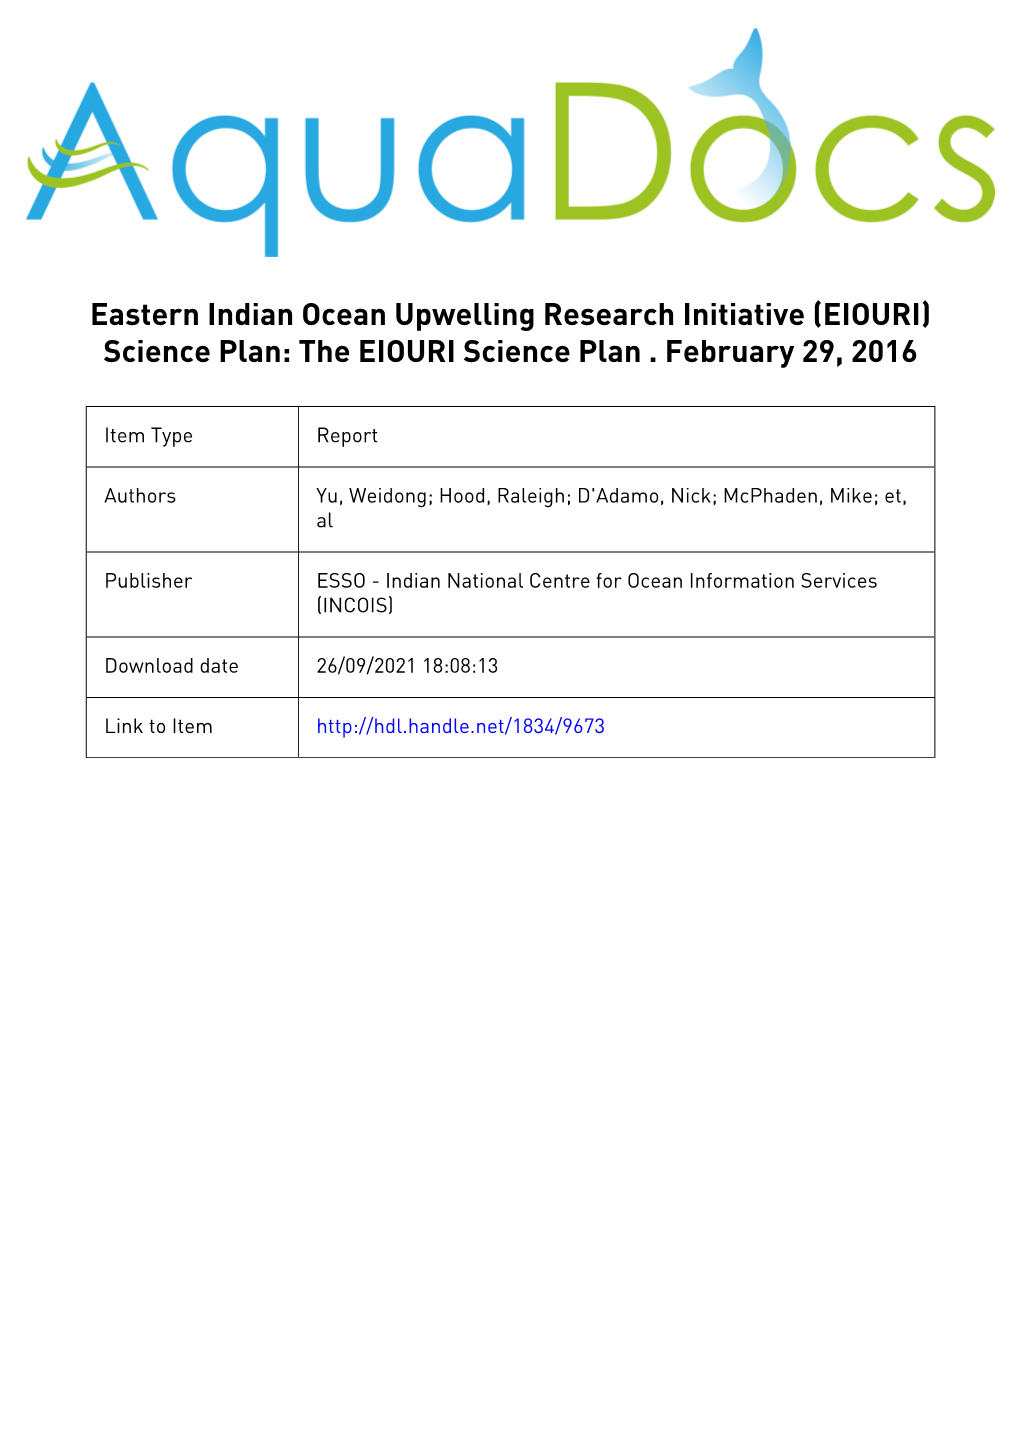 Eastern Indian Ocean Upwelling Research Initiative (EIOURI) Science Plan: the EIOURI Science Plan